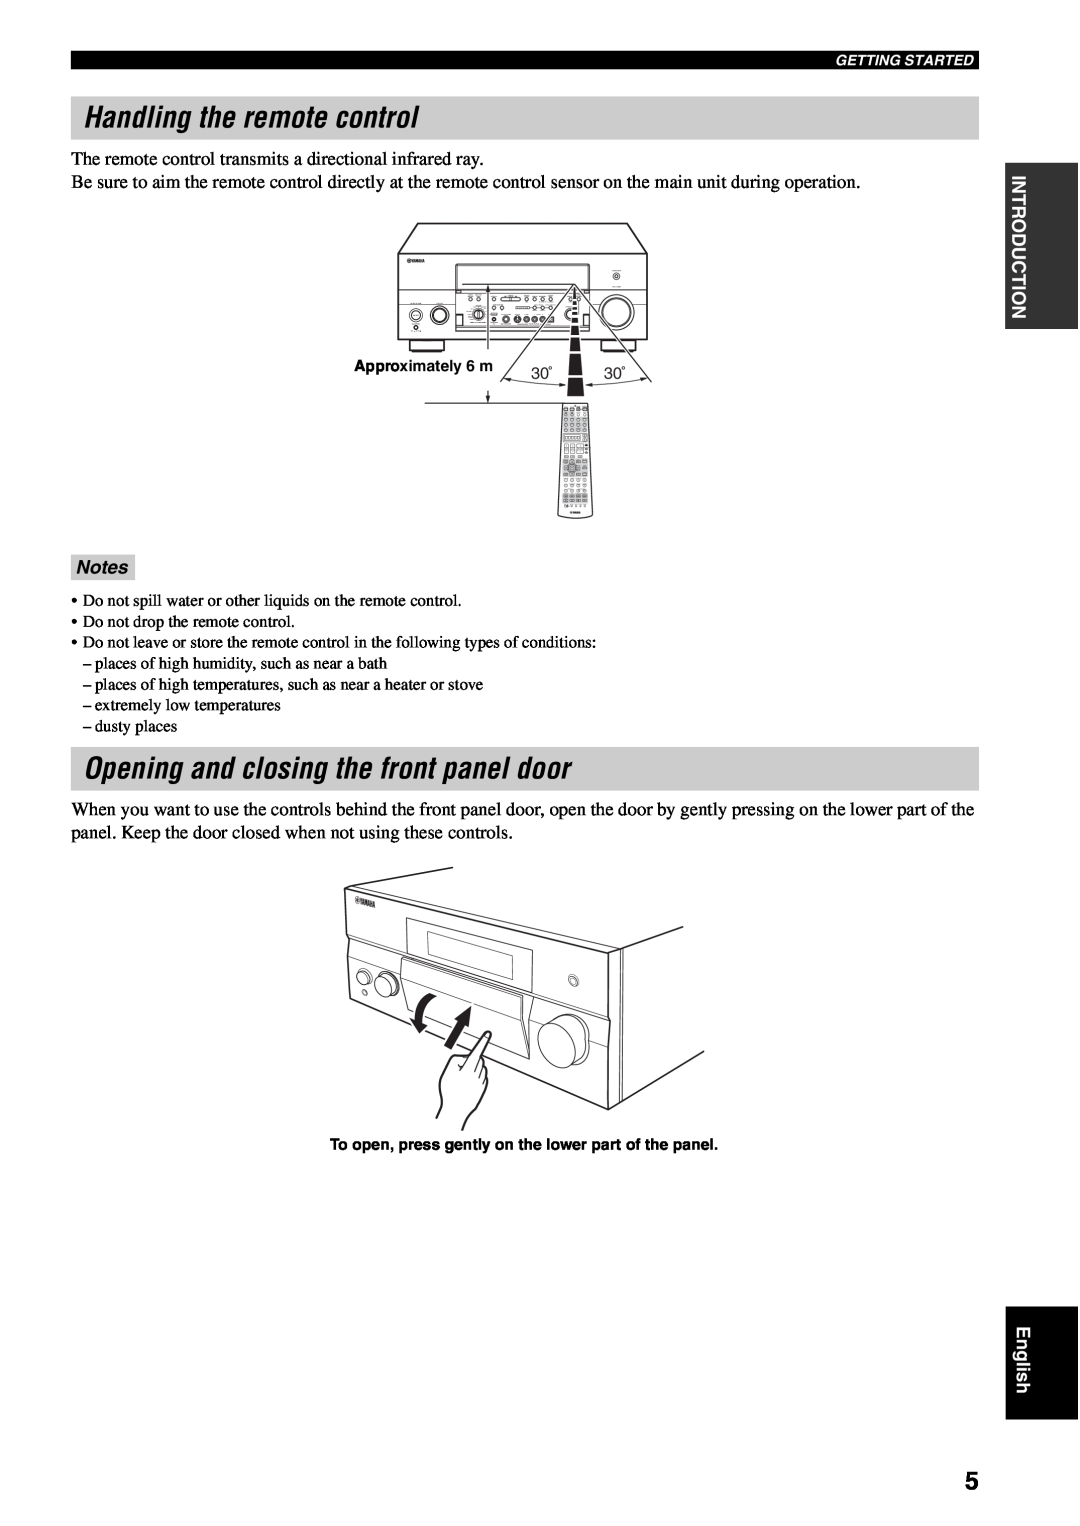 Yamaha RX-V2600 owner manual Handling the remote control, Opening and closing the front panel door 